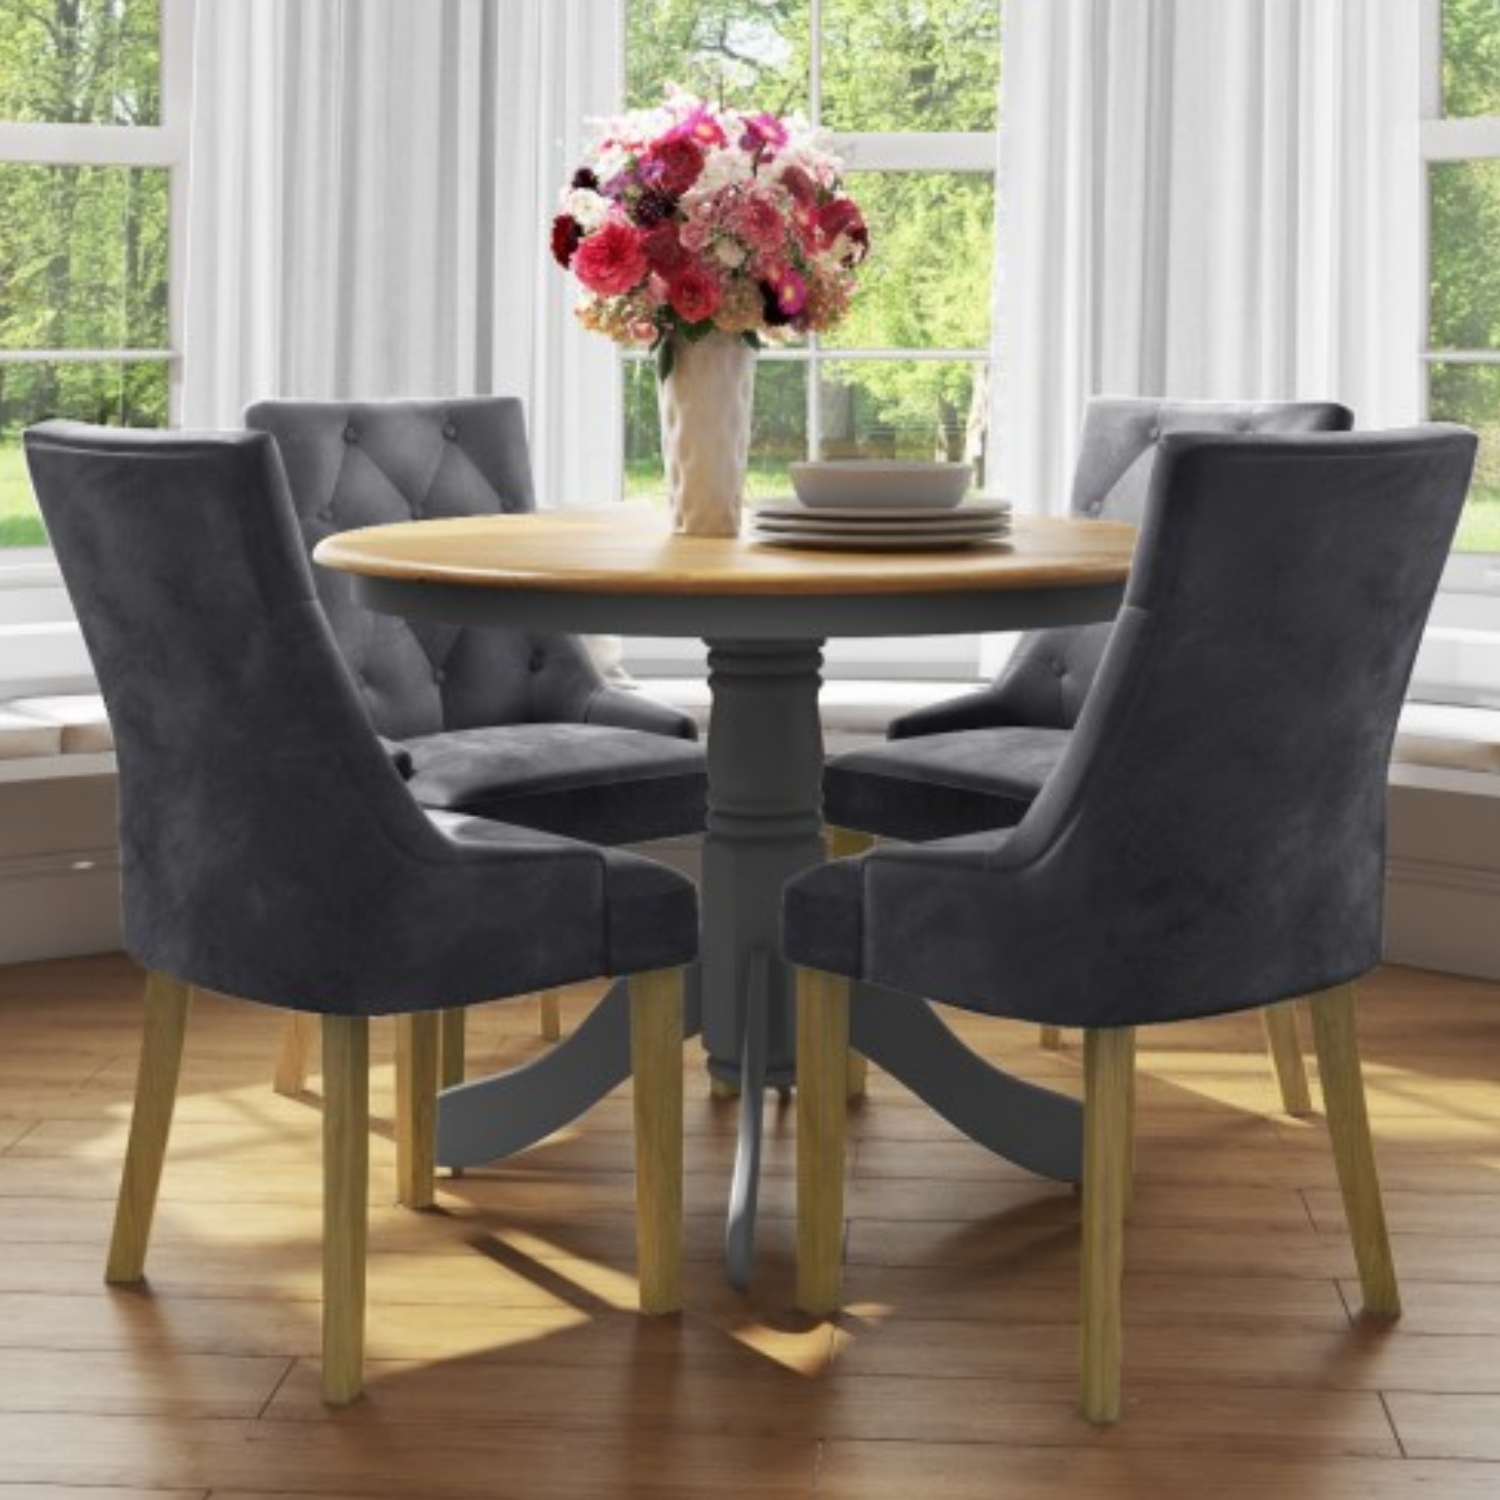 Rhode Island Round Dining Table with 4 Chairs in & Grey with Oak Finish 